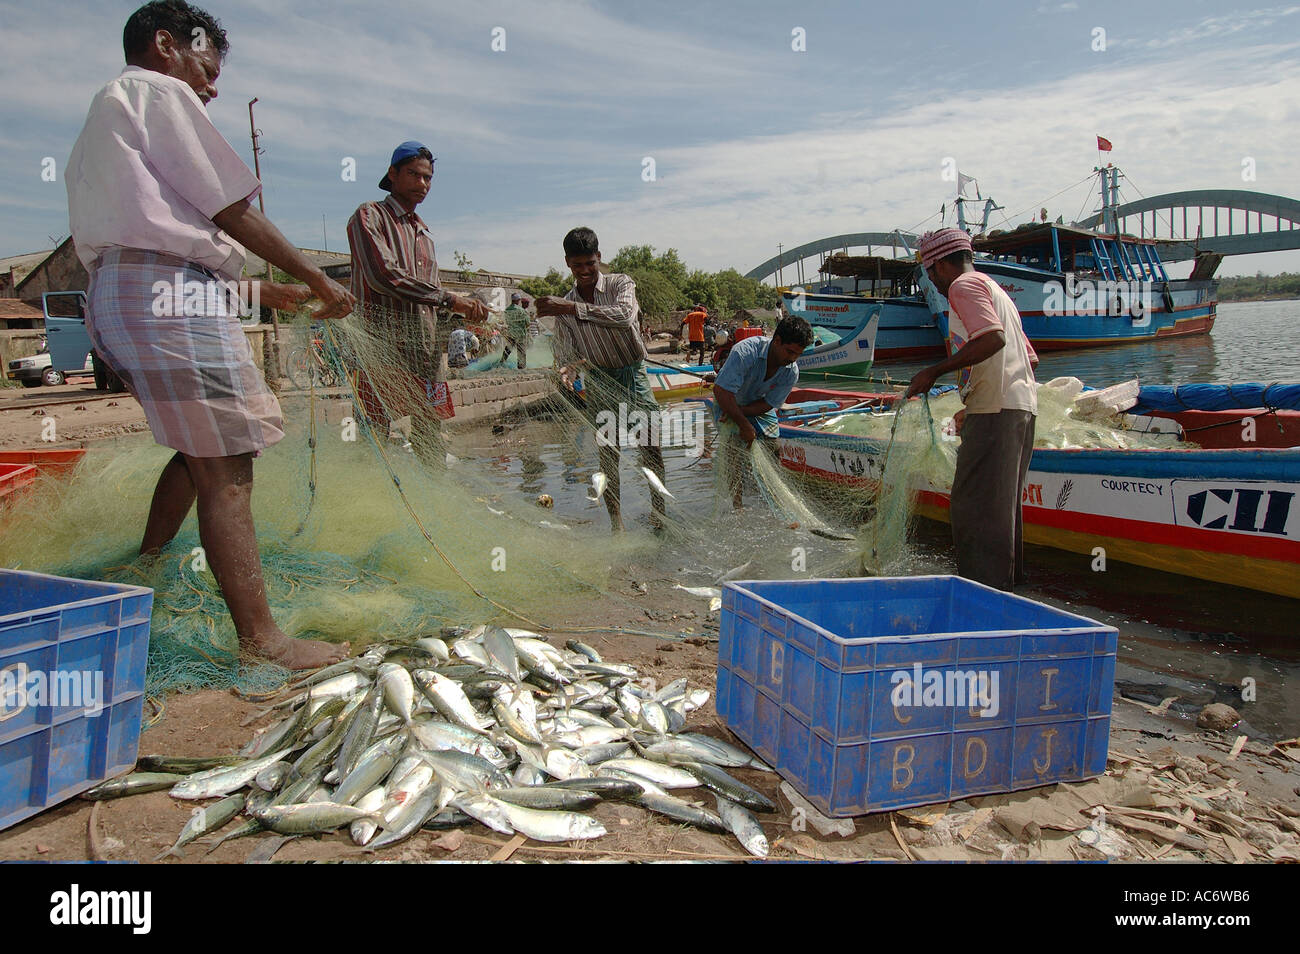 https://c8.alamy.com/comp/AC6WB6/fishing-industry-in-area-hit-by-boxing-day-2004-tsunami-village-of-AC6WB6.jpg